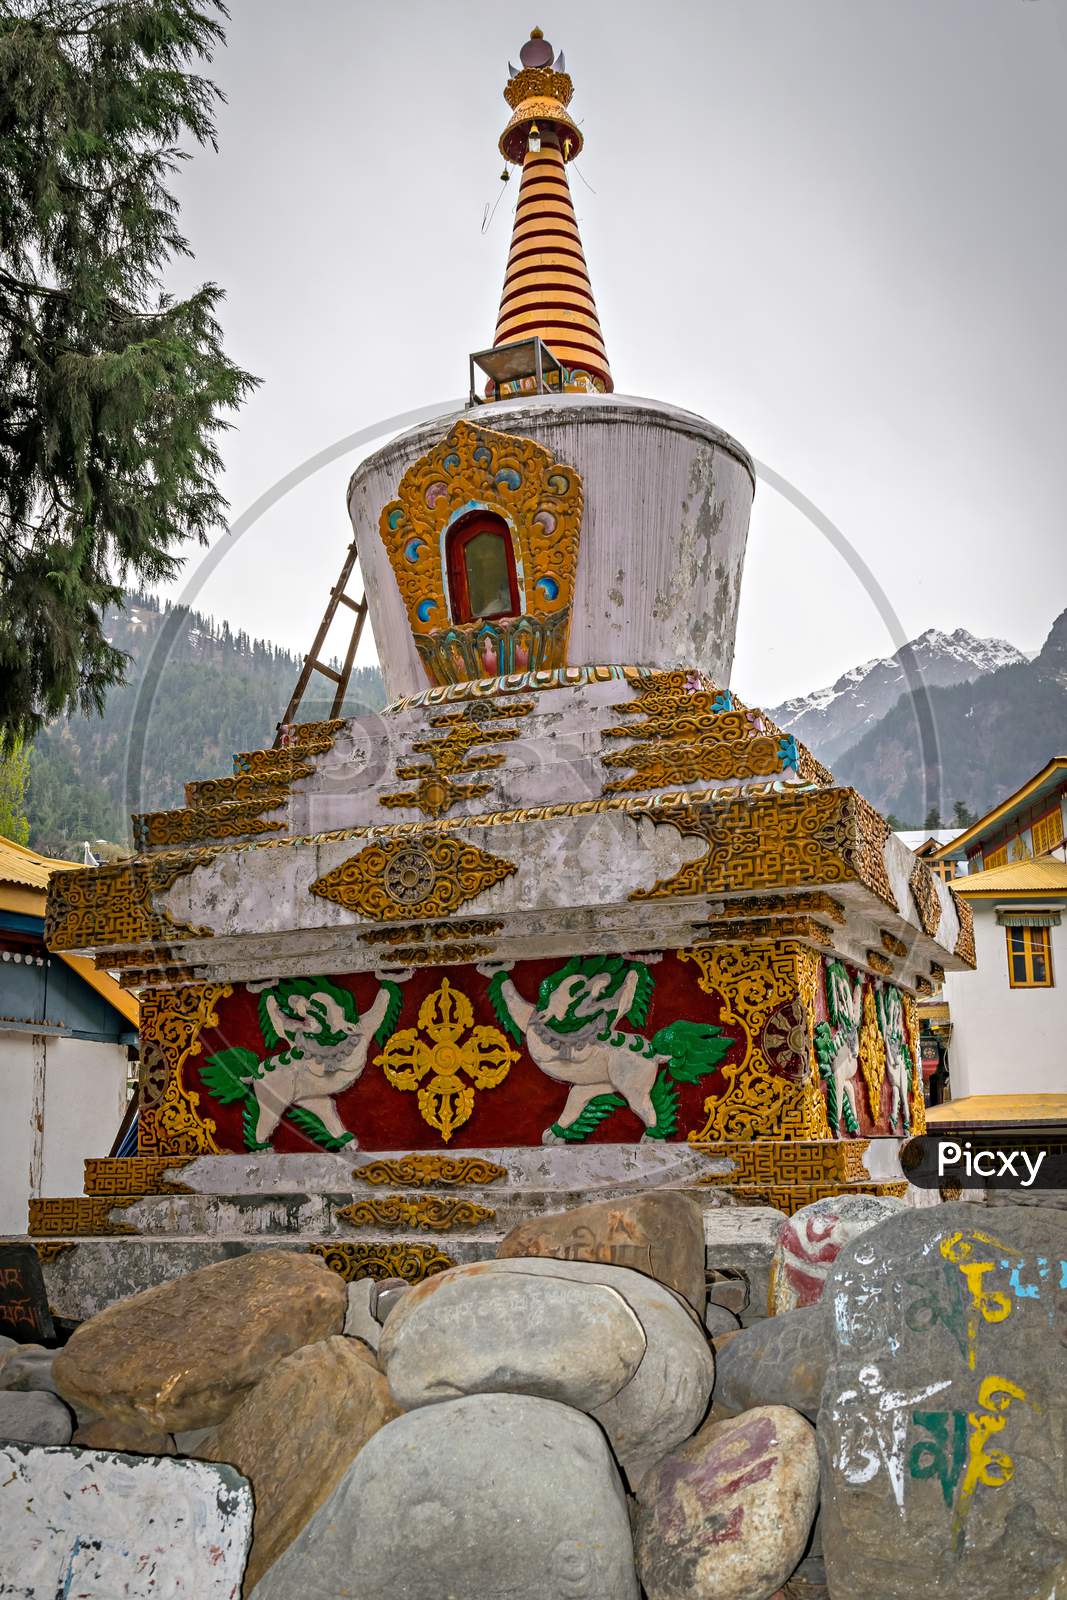 Nicely Hand Painted Colorful Buddhist Pagoda In Manali, Himachal Pradesh,India.